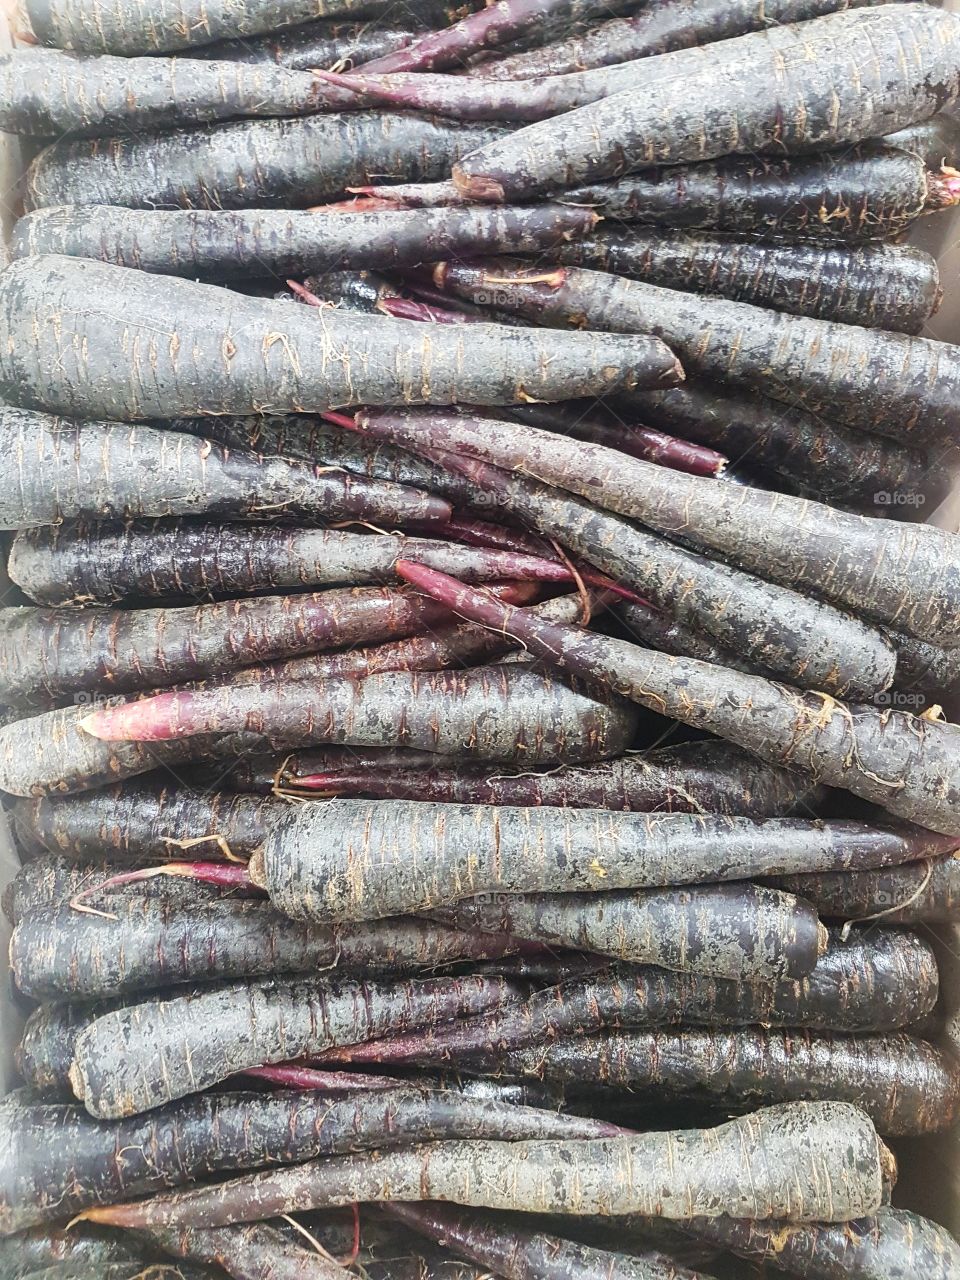 purple carrot variety at market stall fresh fruit and vegetables